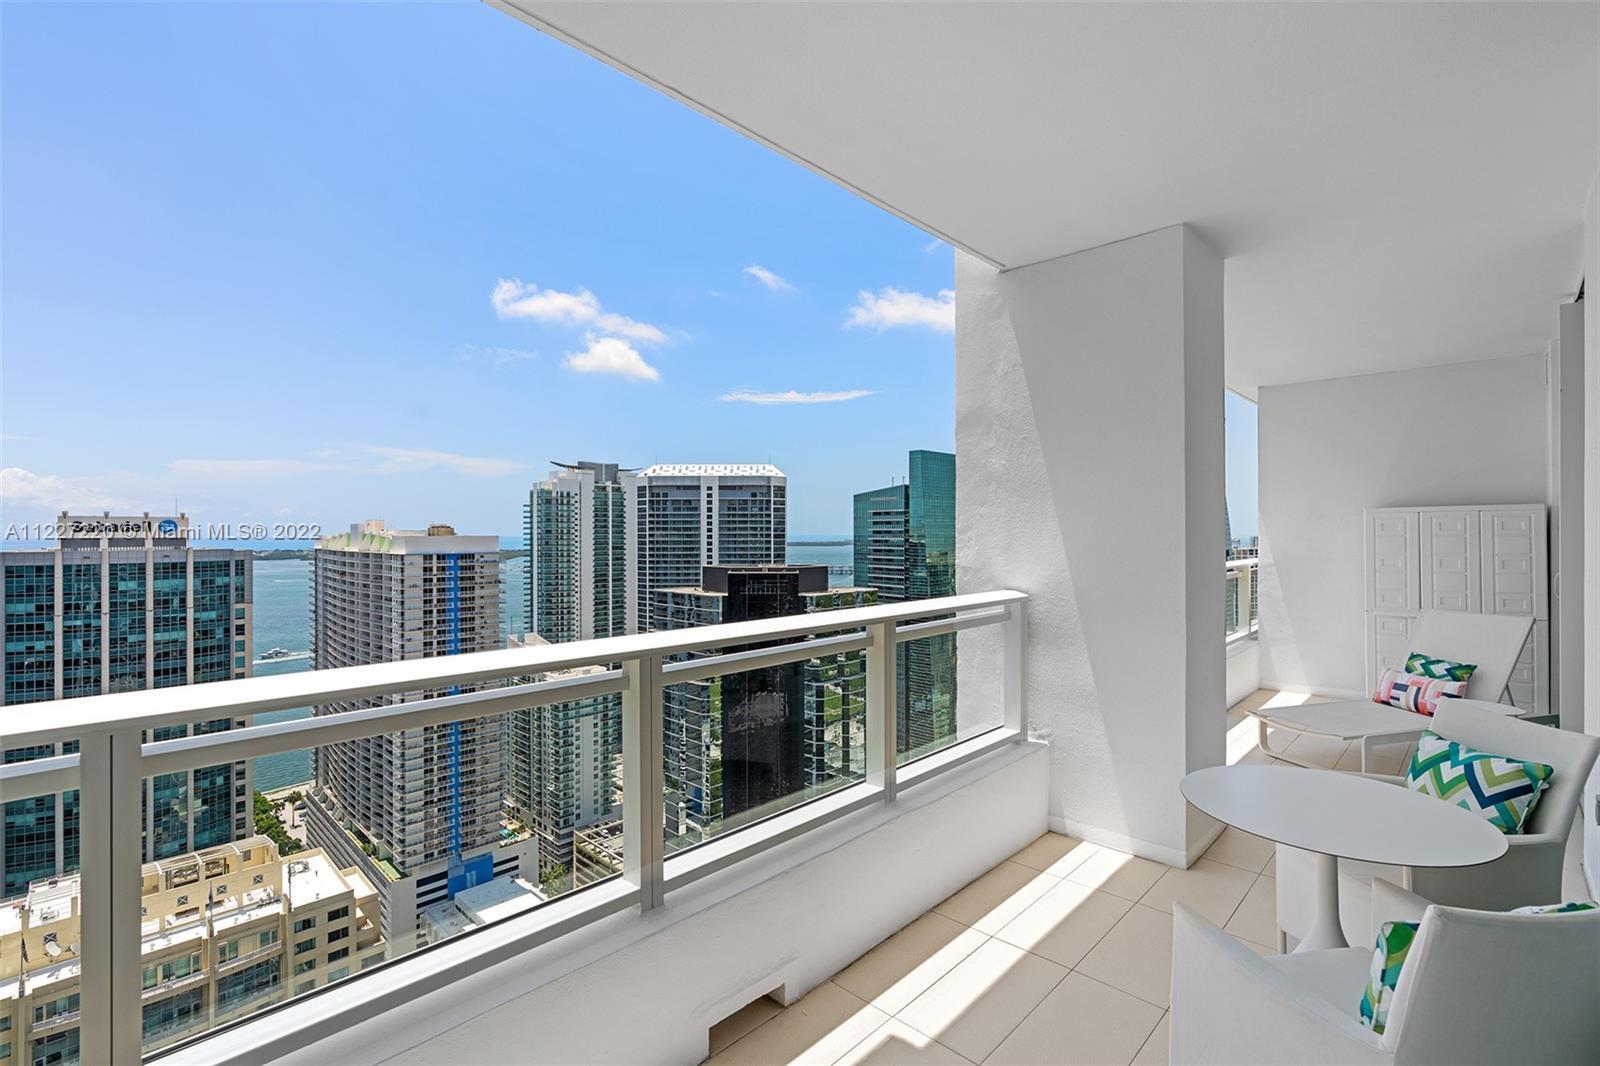 The Bond on Brickell is an impressive luxury residential high-rise in the heart of Brickell and feat